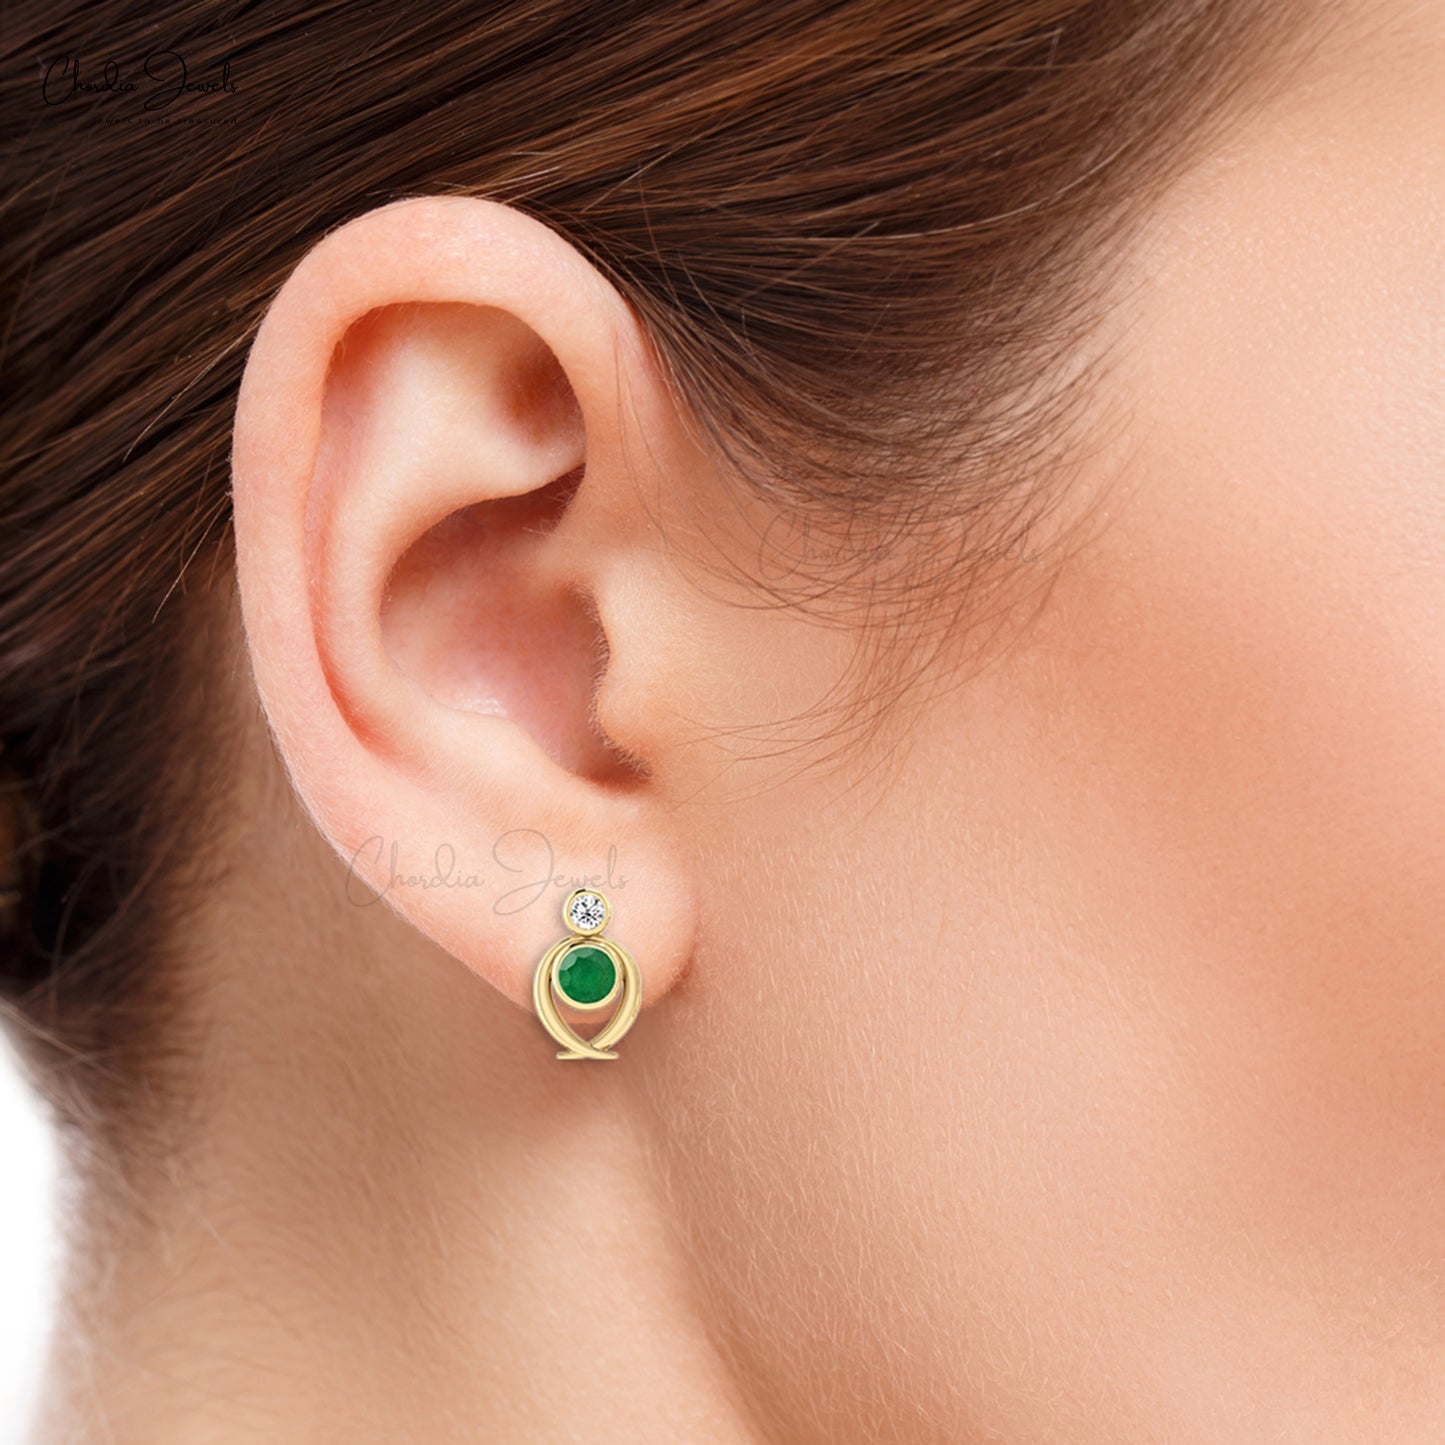 Load image into Gallery viewer, Delicate Emerald Diamond Accented Earrings Genuine 14k Real Gold Push Back Earrings 5mm Brilliant Round Cut Gemstone Jewelry For May Birthstone
